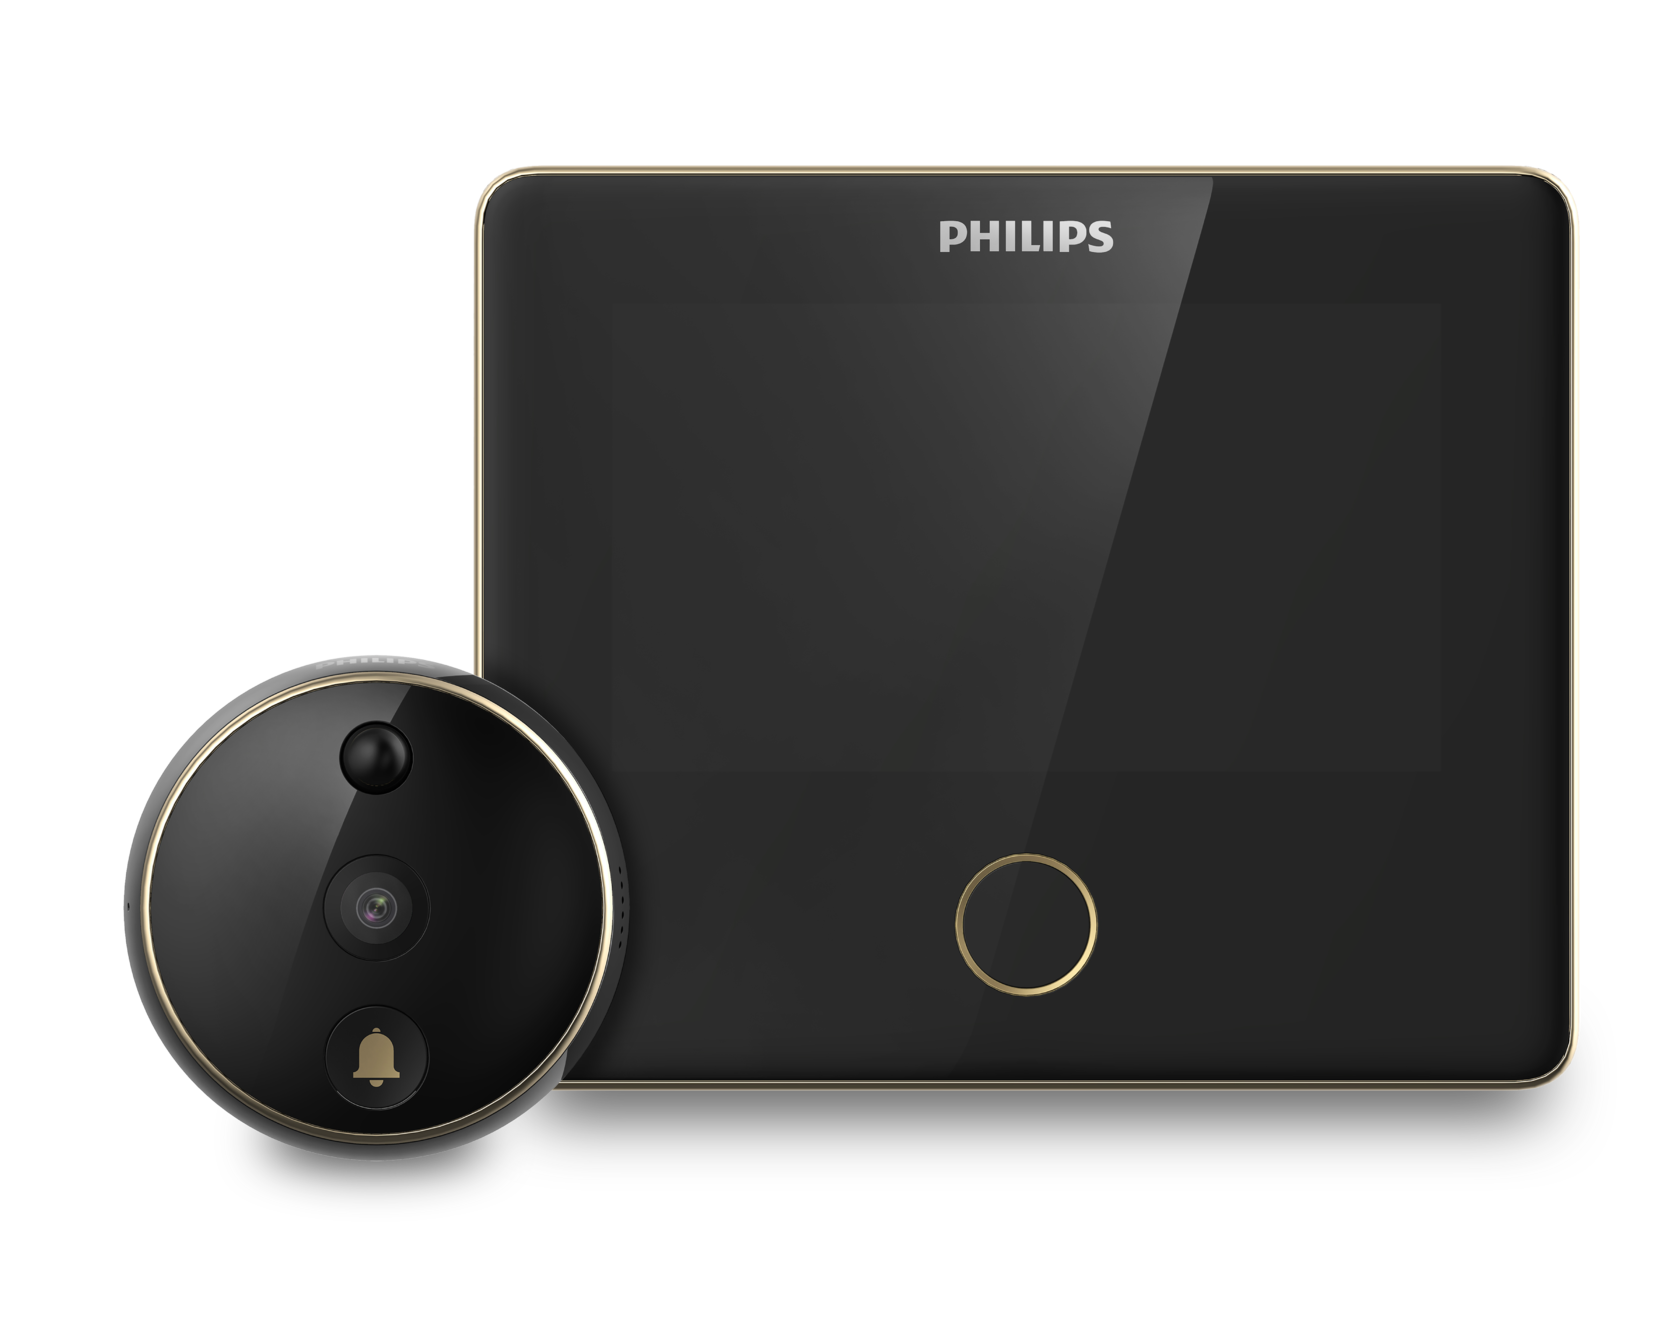 Дверной Wi-Fi видеоглазок Philips Easy Key Smart Door Viewer DV001 на входную дверь wiistar ahd 4x1 multi viewer ahd switcher 4 in 1 out 1080p hdmi quad screen real time multiviewer support two models switching